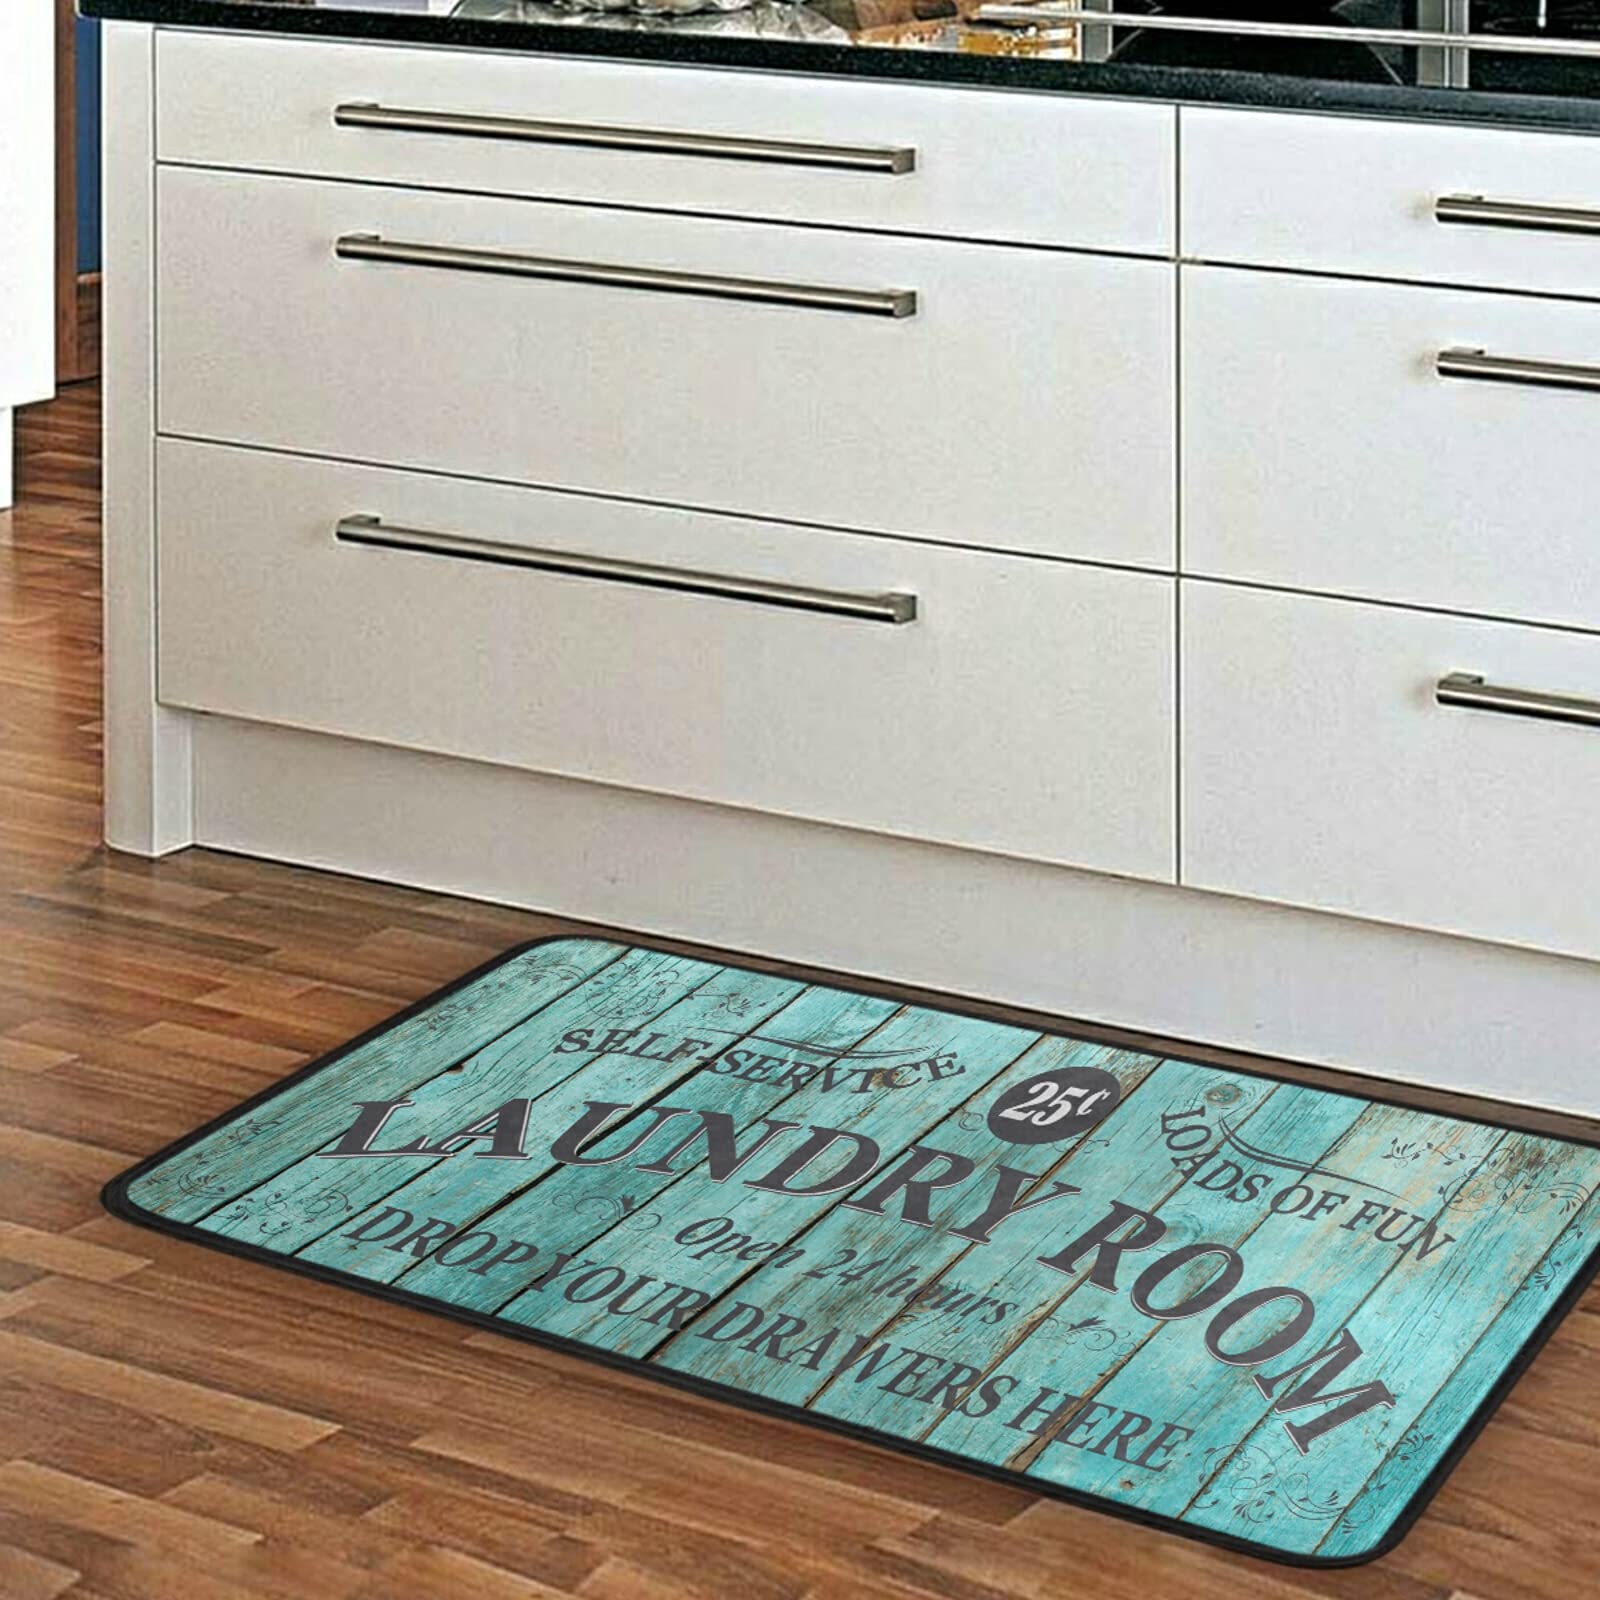 MCHIVER Teal Laundry Room Rug Cushioned Anti-Fatigue Comfort Mat for Engineered Memory Foam Bath Rug for Bathroom Laundry (39" X 20")